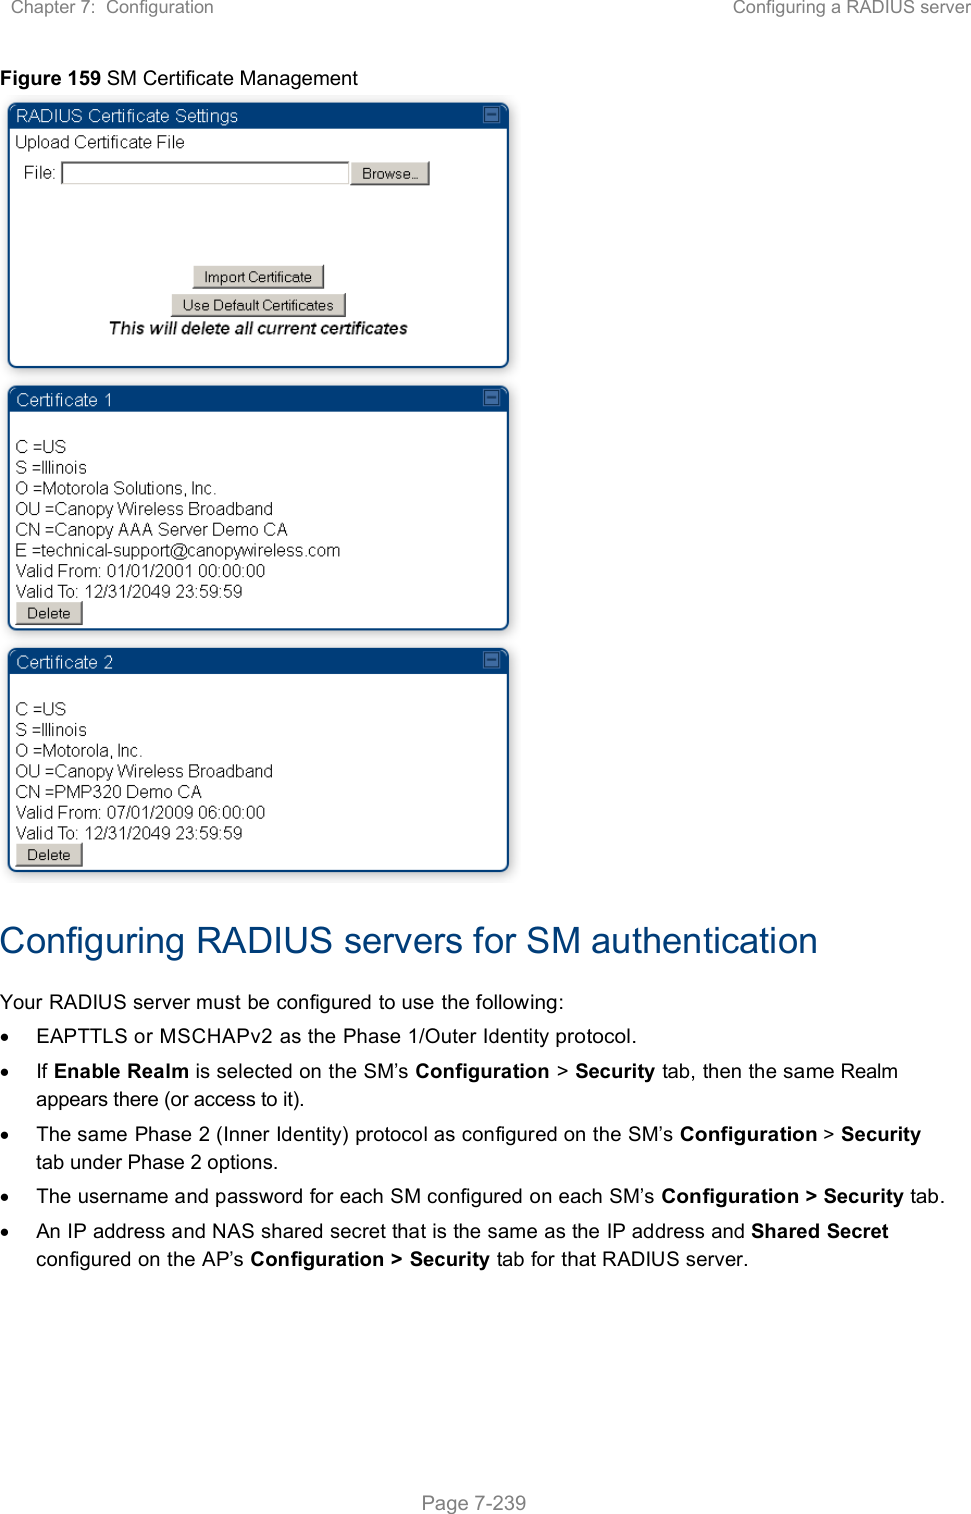 Chapter 7:  Configuration  Configuring a RADIUS server   Page 7-239 Figure 159 SM Certificate Management  Configuring RADIUS servers for SM authentication Your RADIUS server must be configured to use the following:   EAPTTLS or MSCHAPv2 as the Phase 1/Outer Identity protocol.  If Enable Realm is selected on the SM’s Configuration &gt; Security tab, then the same Realm appears there (or access to it).   The same Phase 2 (Inner Identity) protocol as configured on the SM’s Configuration &gt; Security tab under Phase 2 options.   The username and password for each SM configured on each SM’s Configuration &gt; Security tab.   An IP address and NAS shared secret that is the same as the IP address and Shared Secret configured on the AP’s Configuration &gt; Security tab for that RADIUS server. 